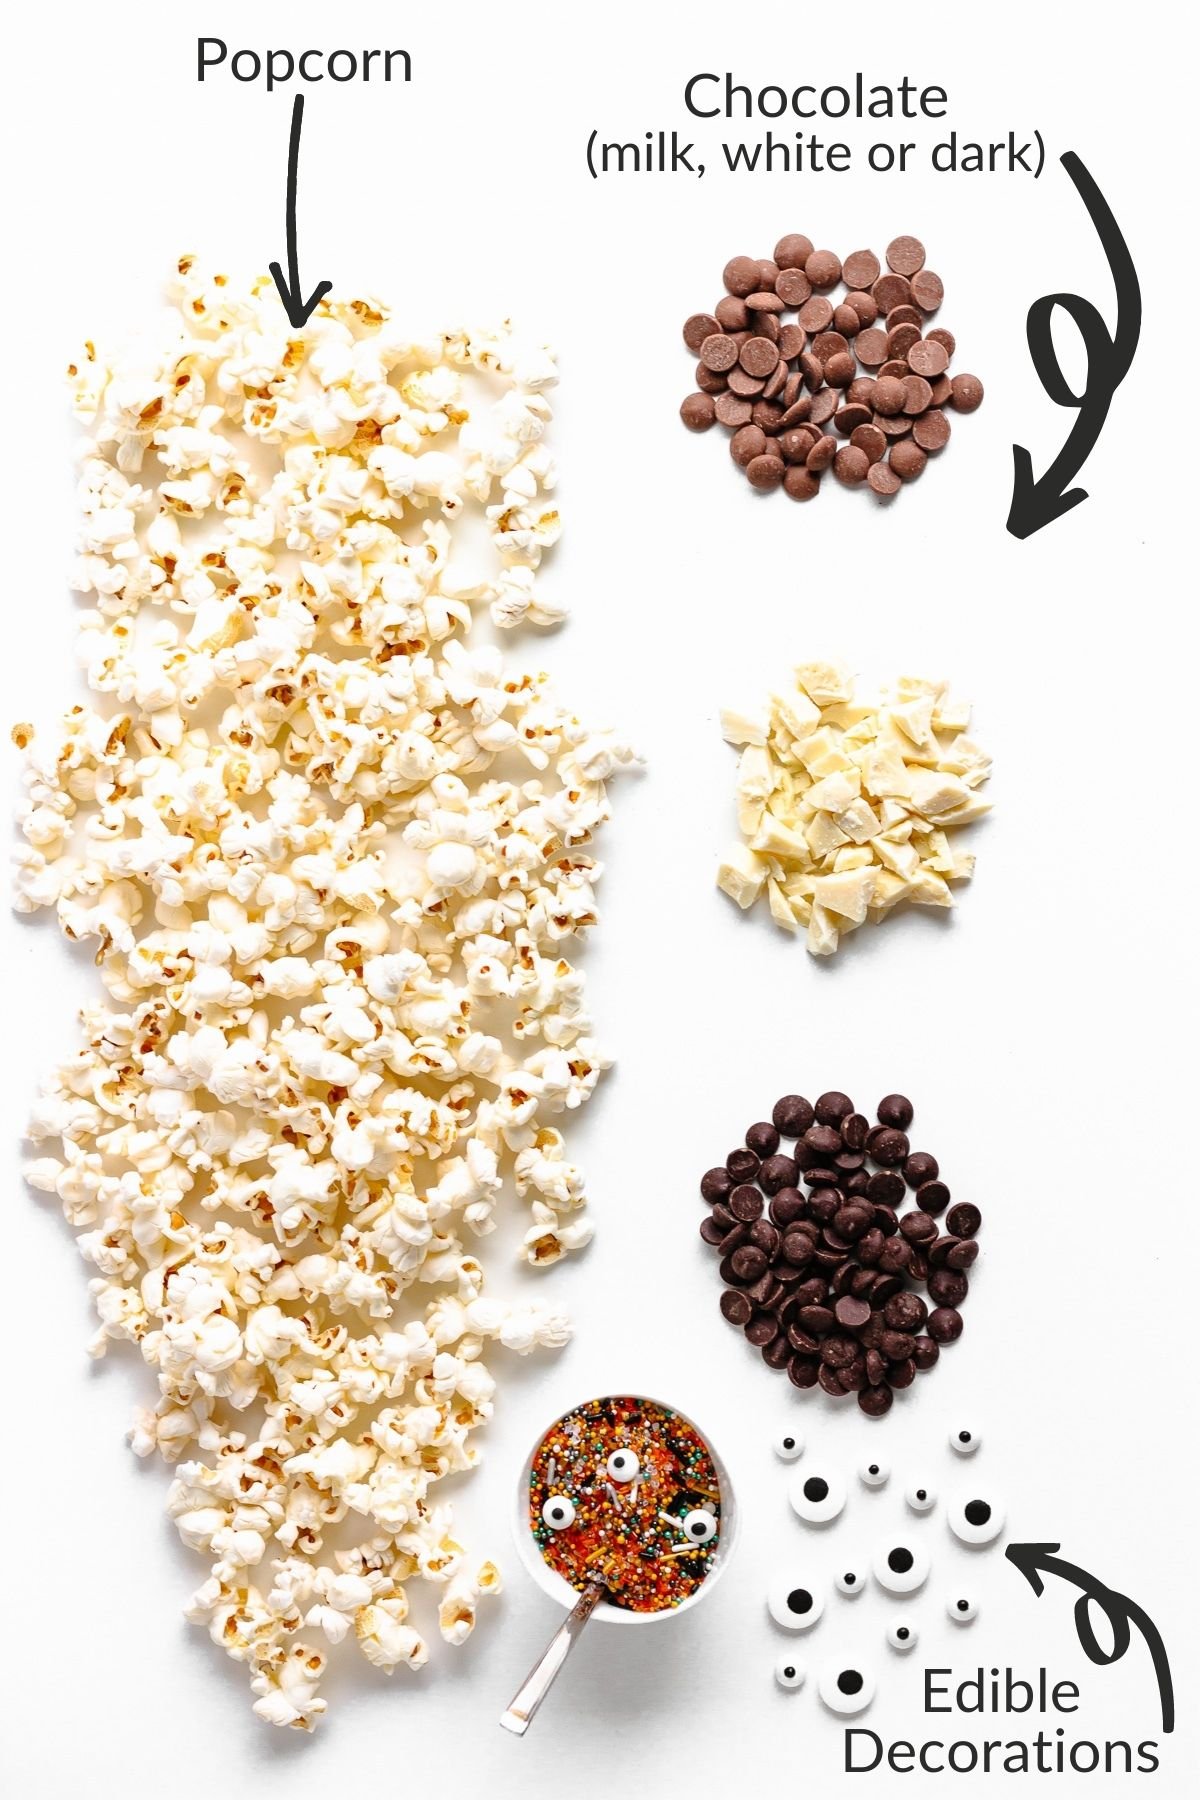 Labelled image of ingredients needed to make chocolate Halloween popcorn balls.